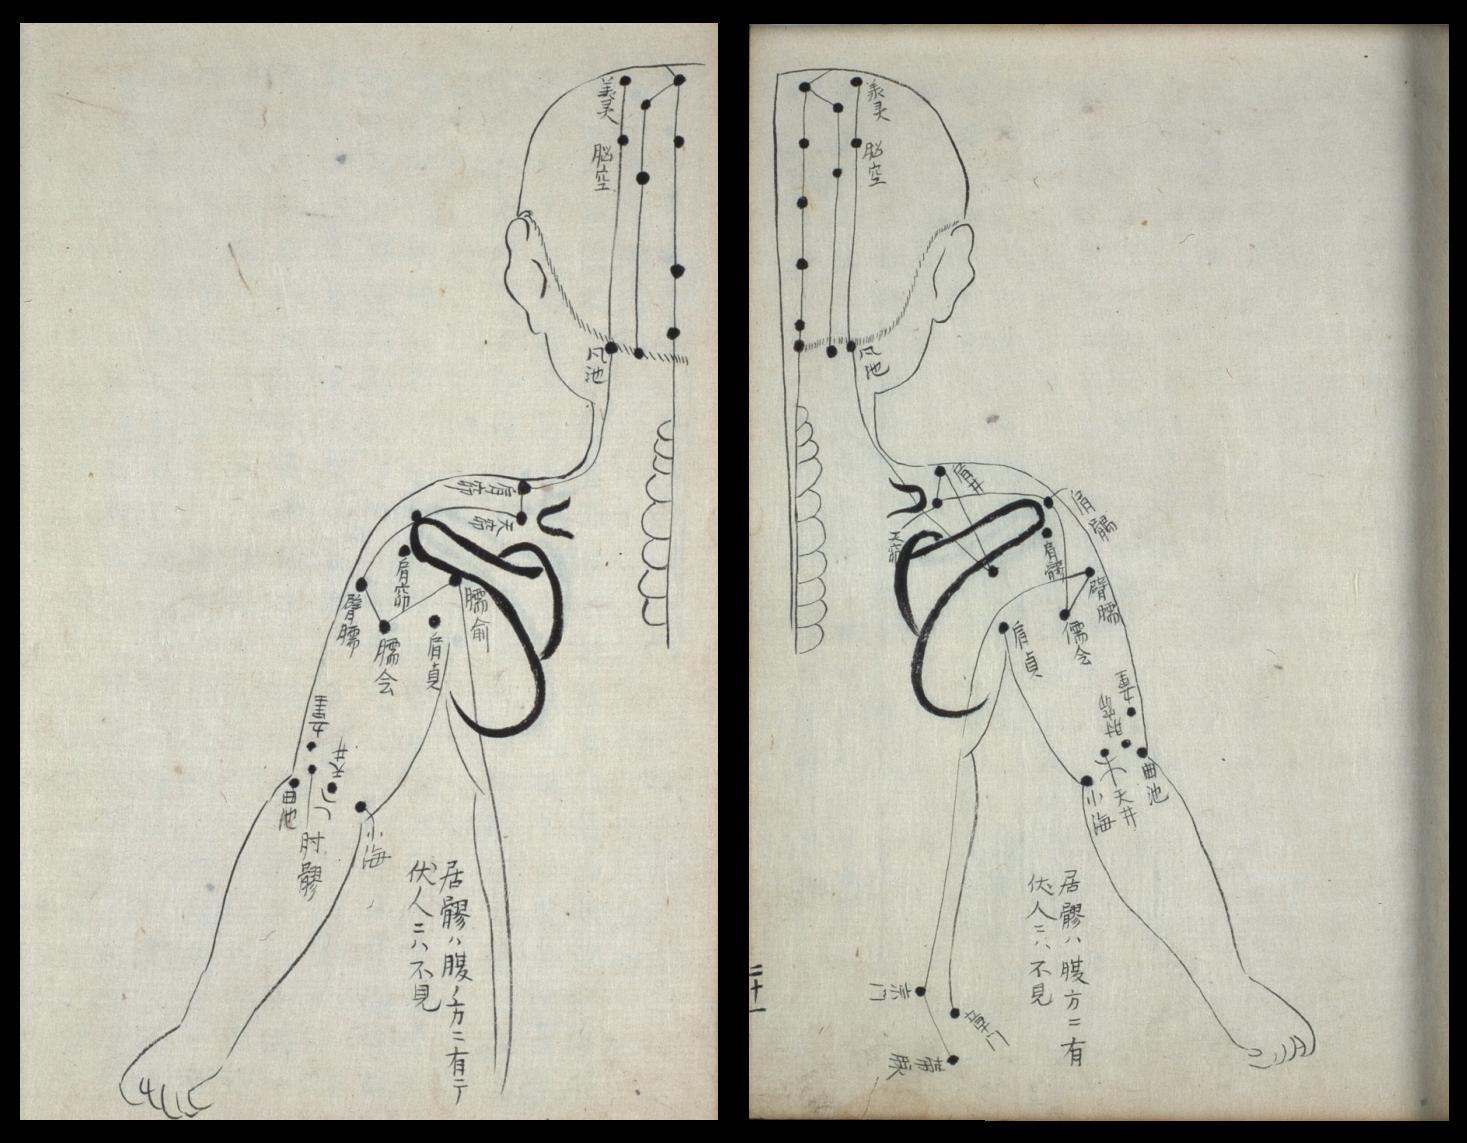 lateral acupuncture points - rare book from Japan